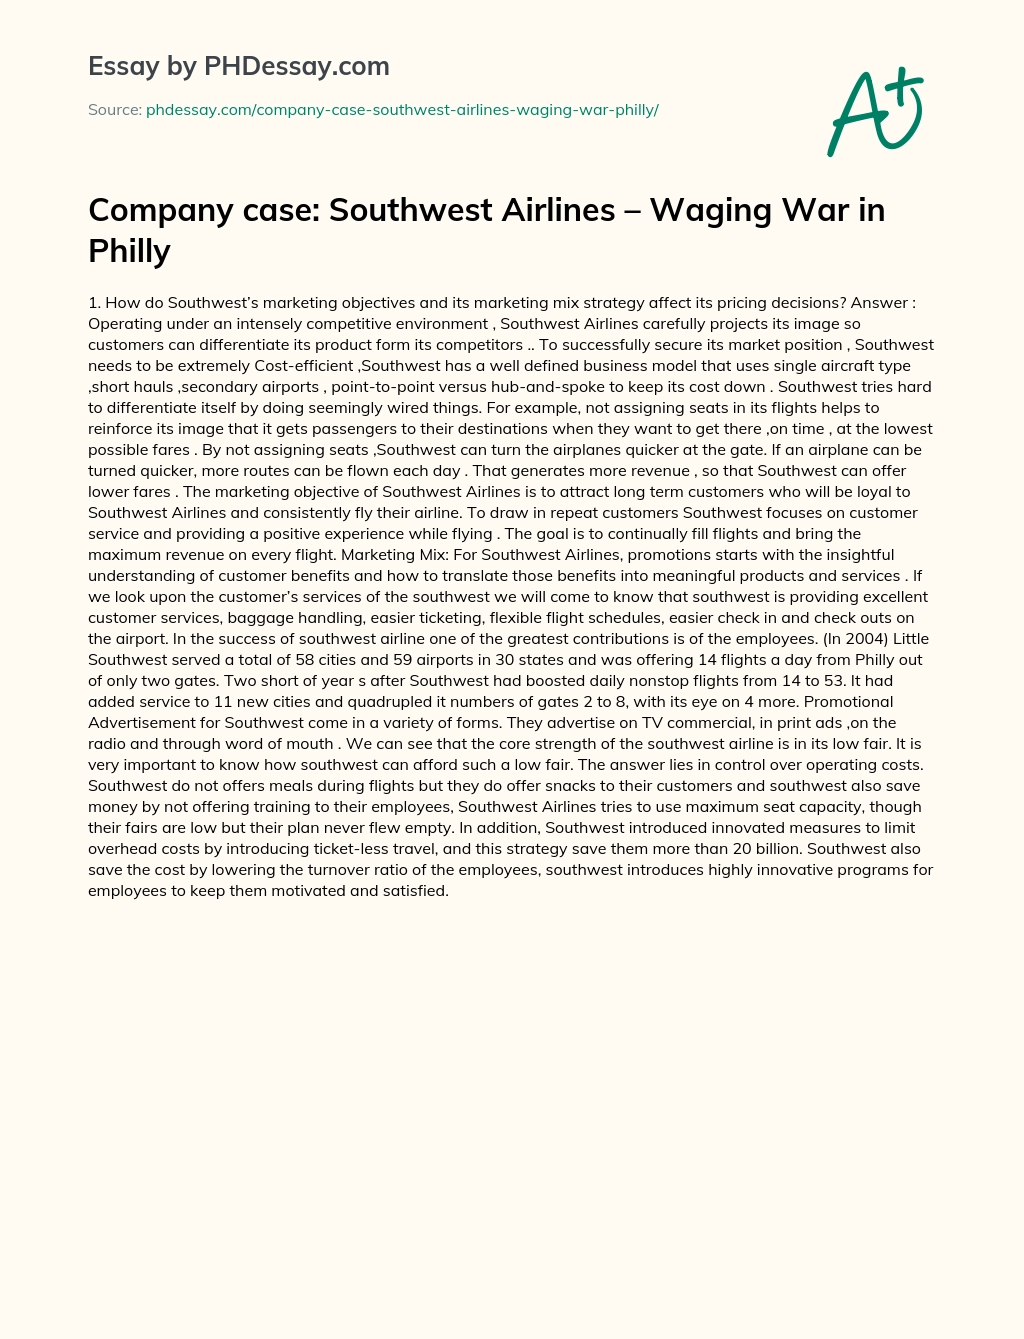 Pricing Strategy of Southwest Airlines essay